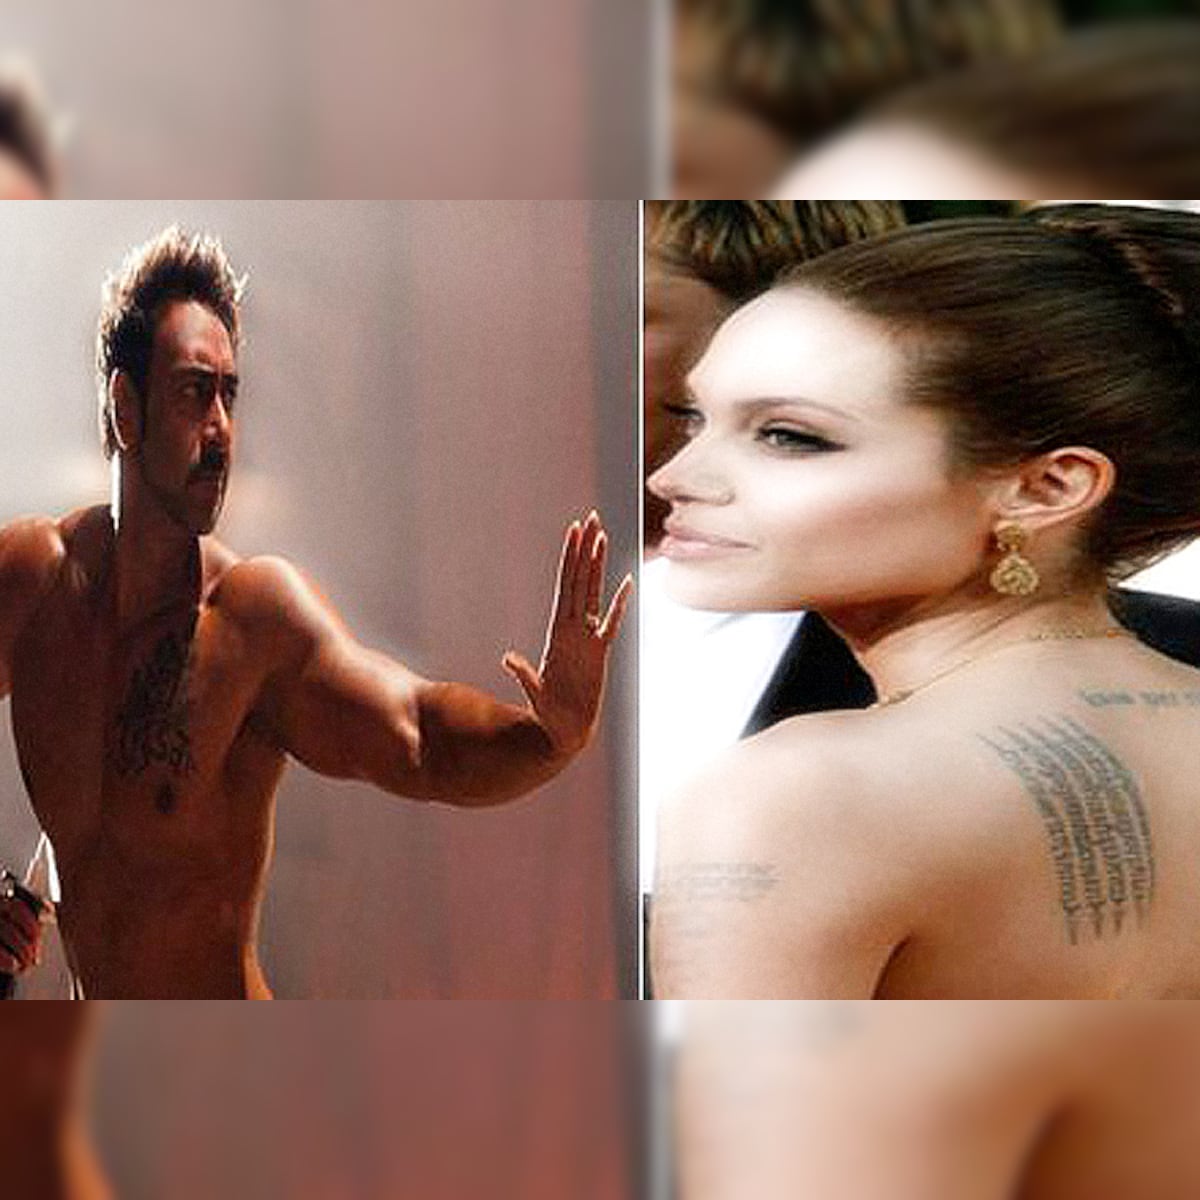 Ajay Devgn To Angelina Jolie Stars Religious Tattoos That Ll Have You Looking At The Art In A Completely Different Way